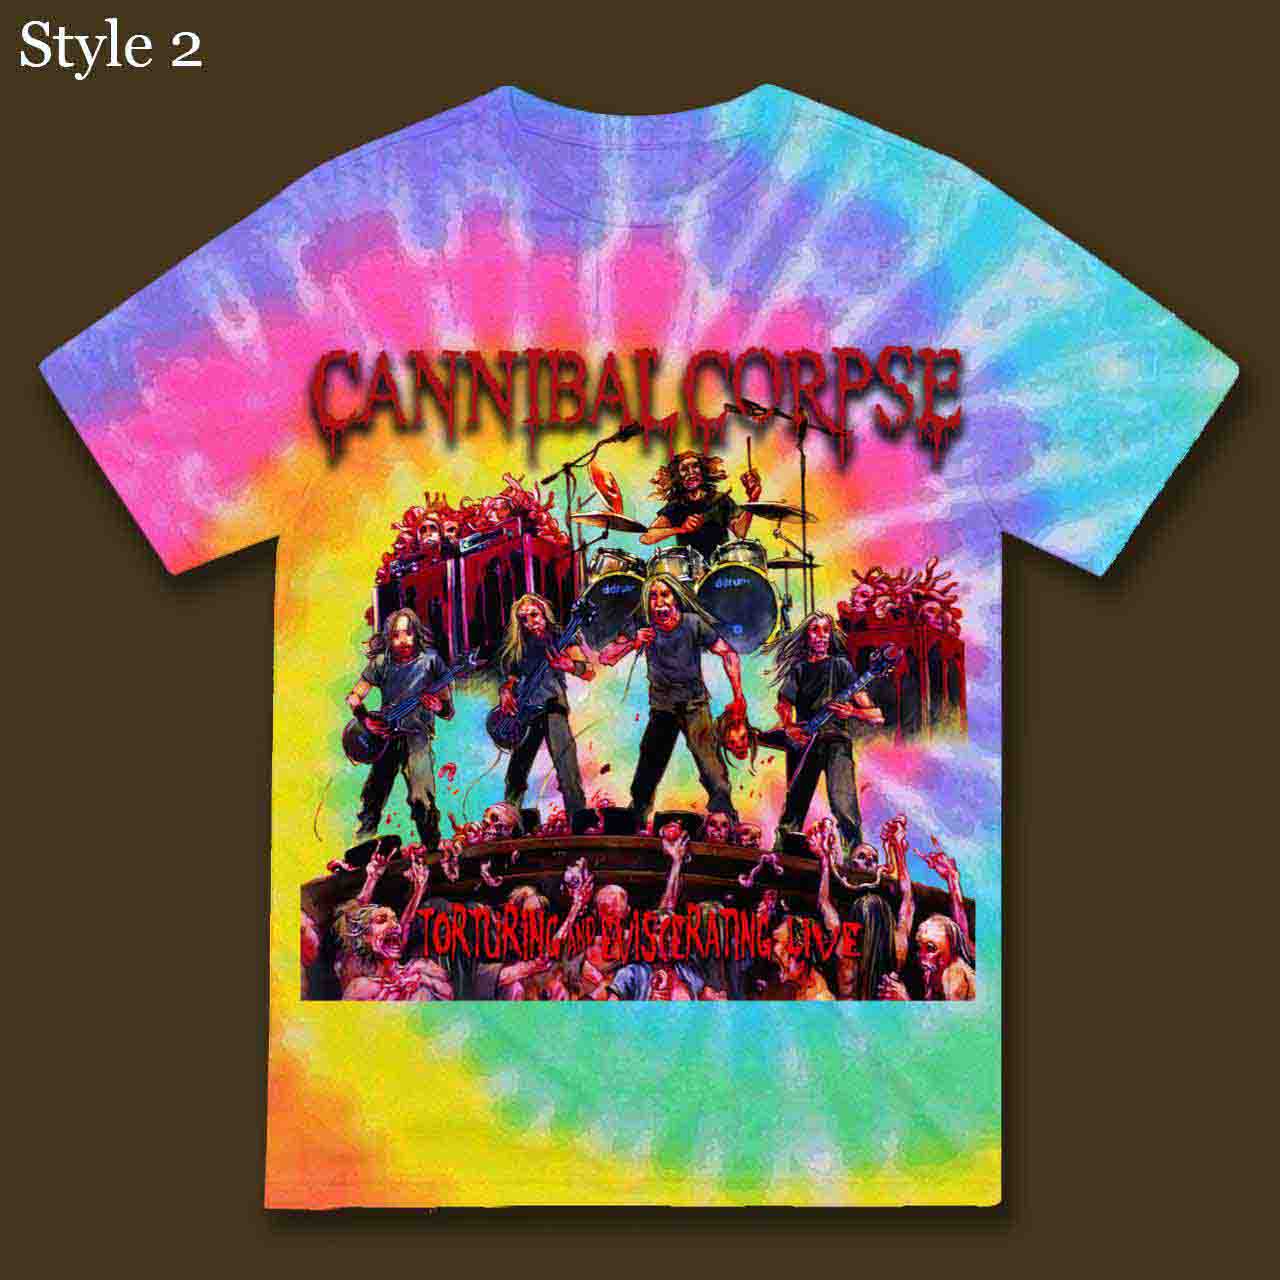 Cannibal Corpse Torturing And Eviscerating Live Shirt Tie Dye